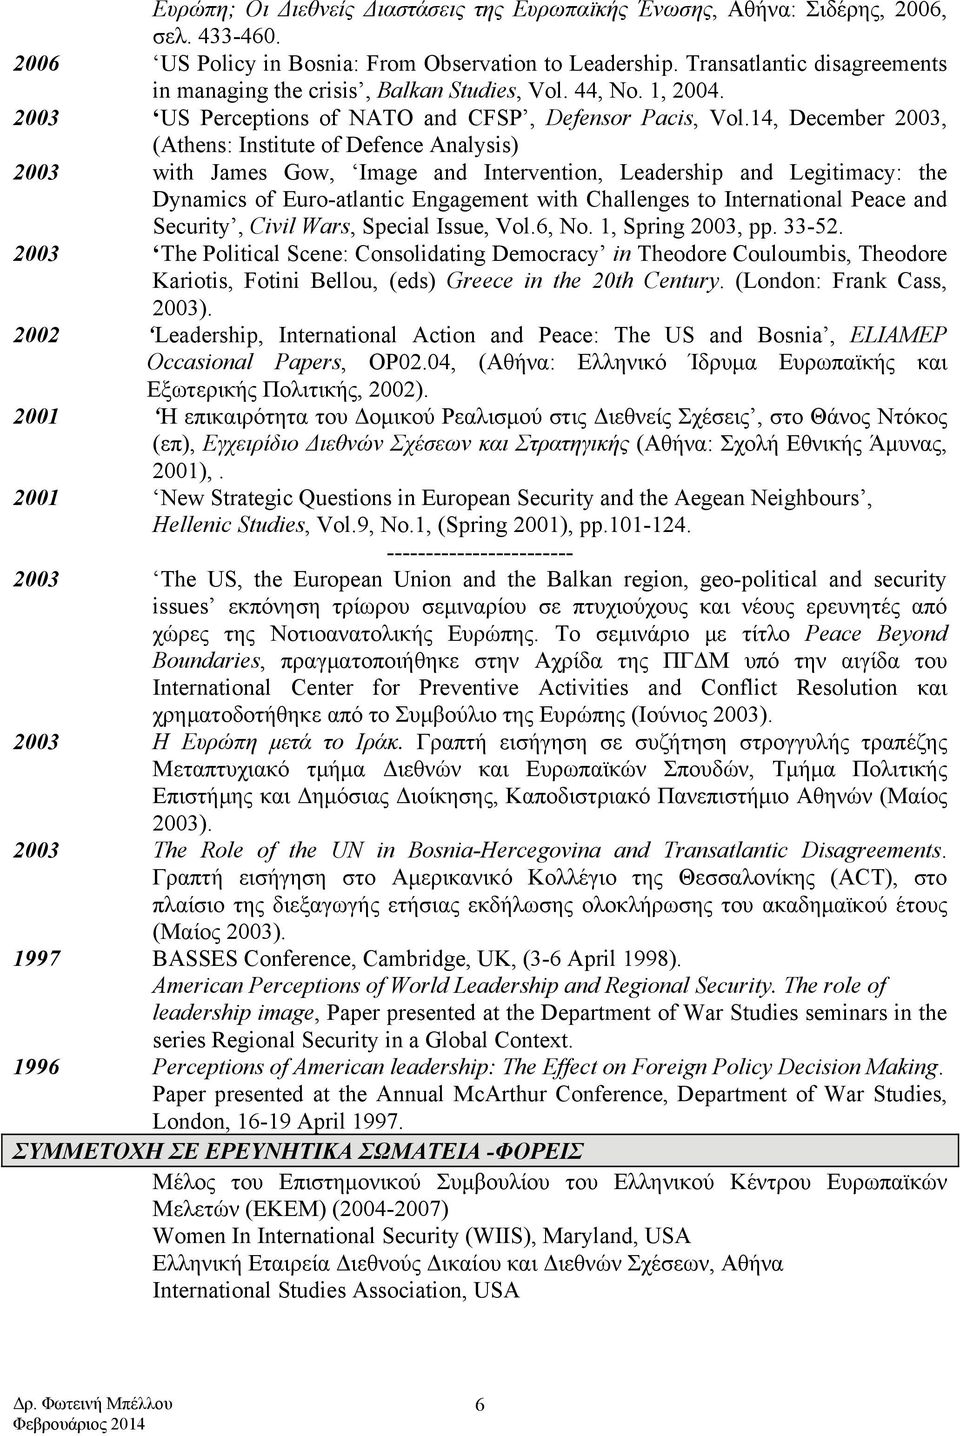 14, December 2003, (Athens: Institute of Defence Analysis) 2003 with James Gow, Image and Intervention, Leadership and Legitimacy: the Dynamics of Euro-atlantic Engagement with Challenges to